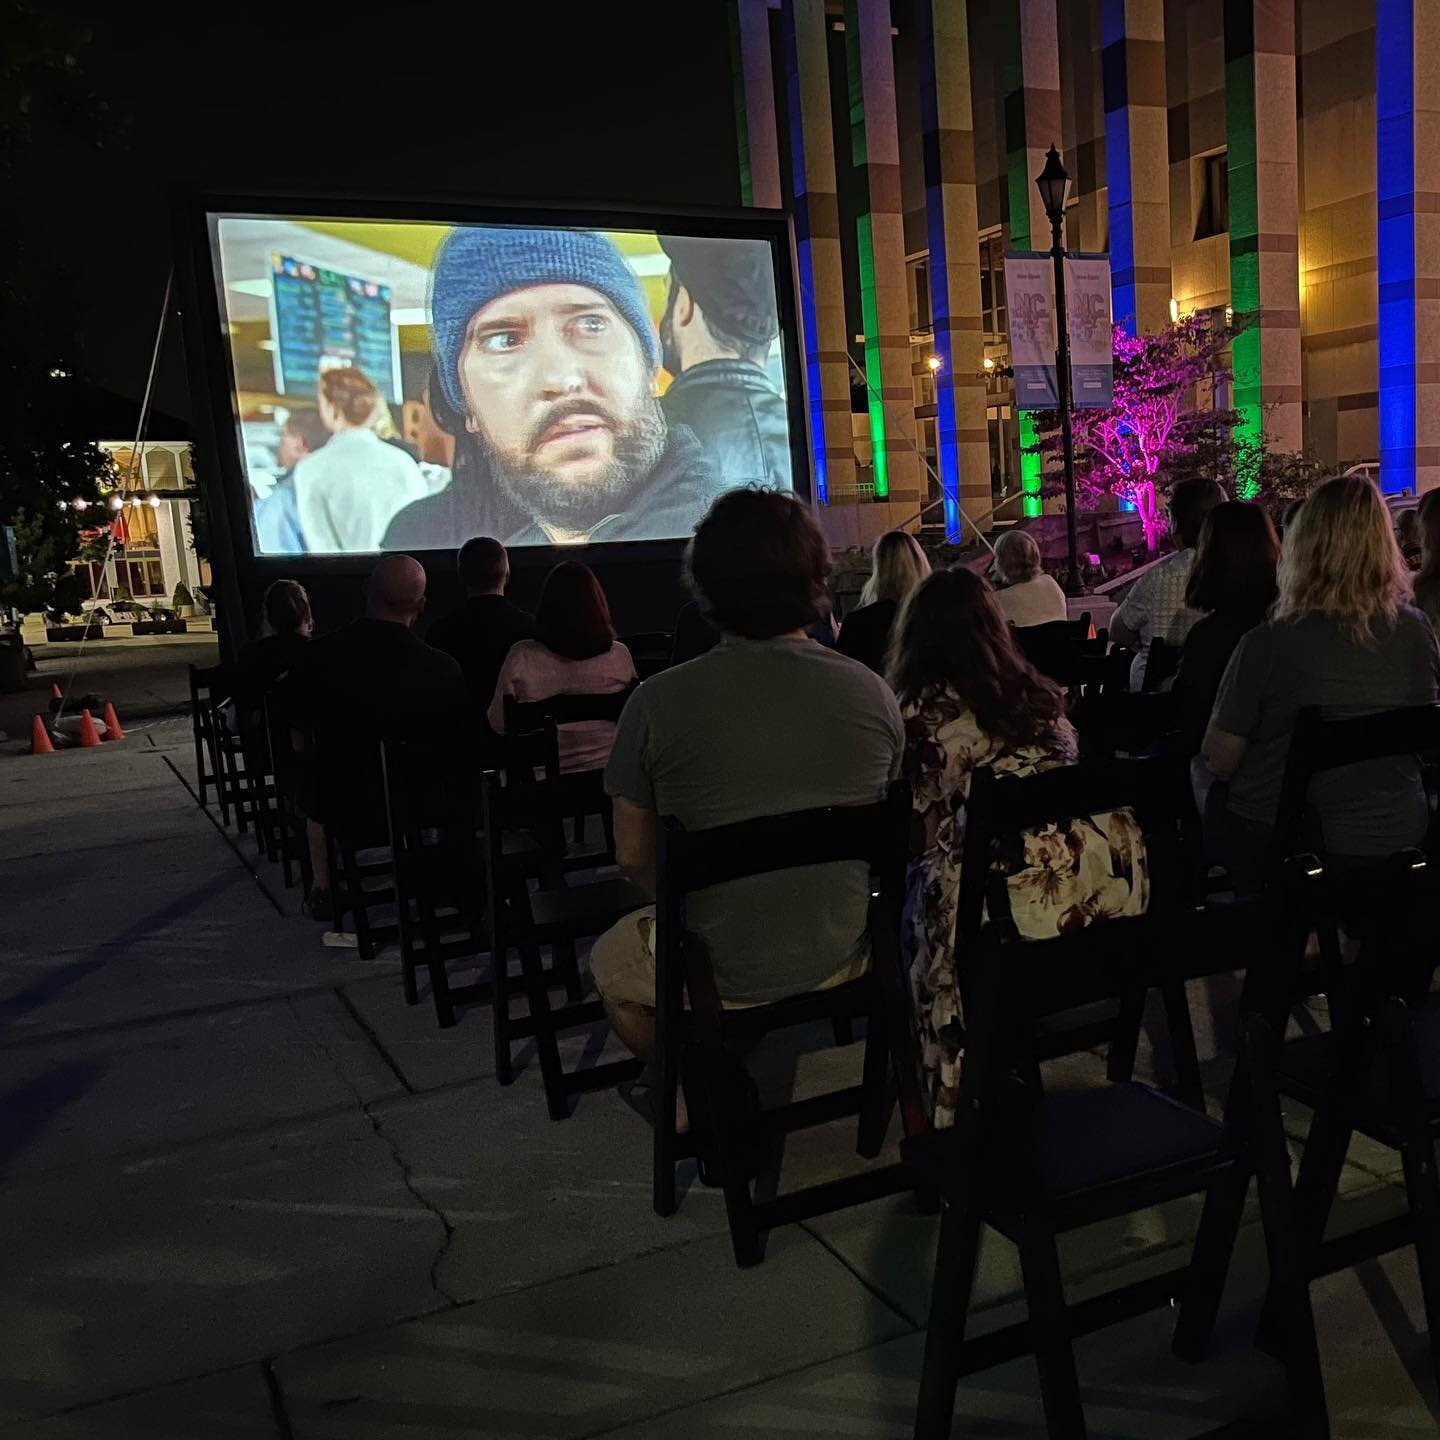 We had a great time last night at Movies-N-Moonlight, part of the 2023 Longleaf Film Festival in downtown Raleigh. The face on the big screen belongs to Michael Howard, one of our OH CRAPPY DAY performers, starring in a comedy short called &ldquo;The